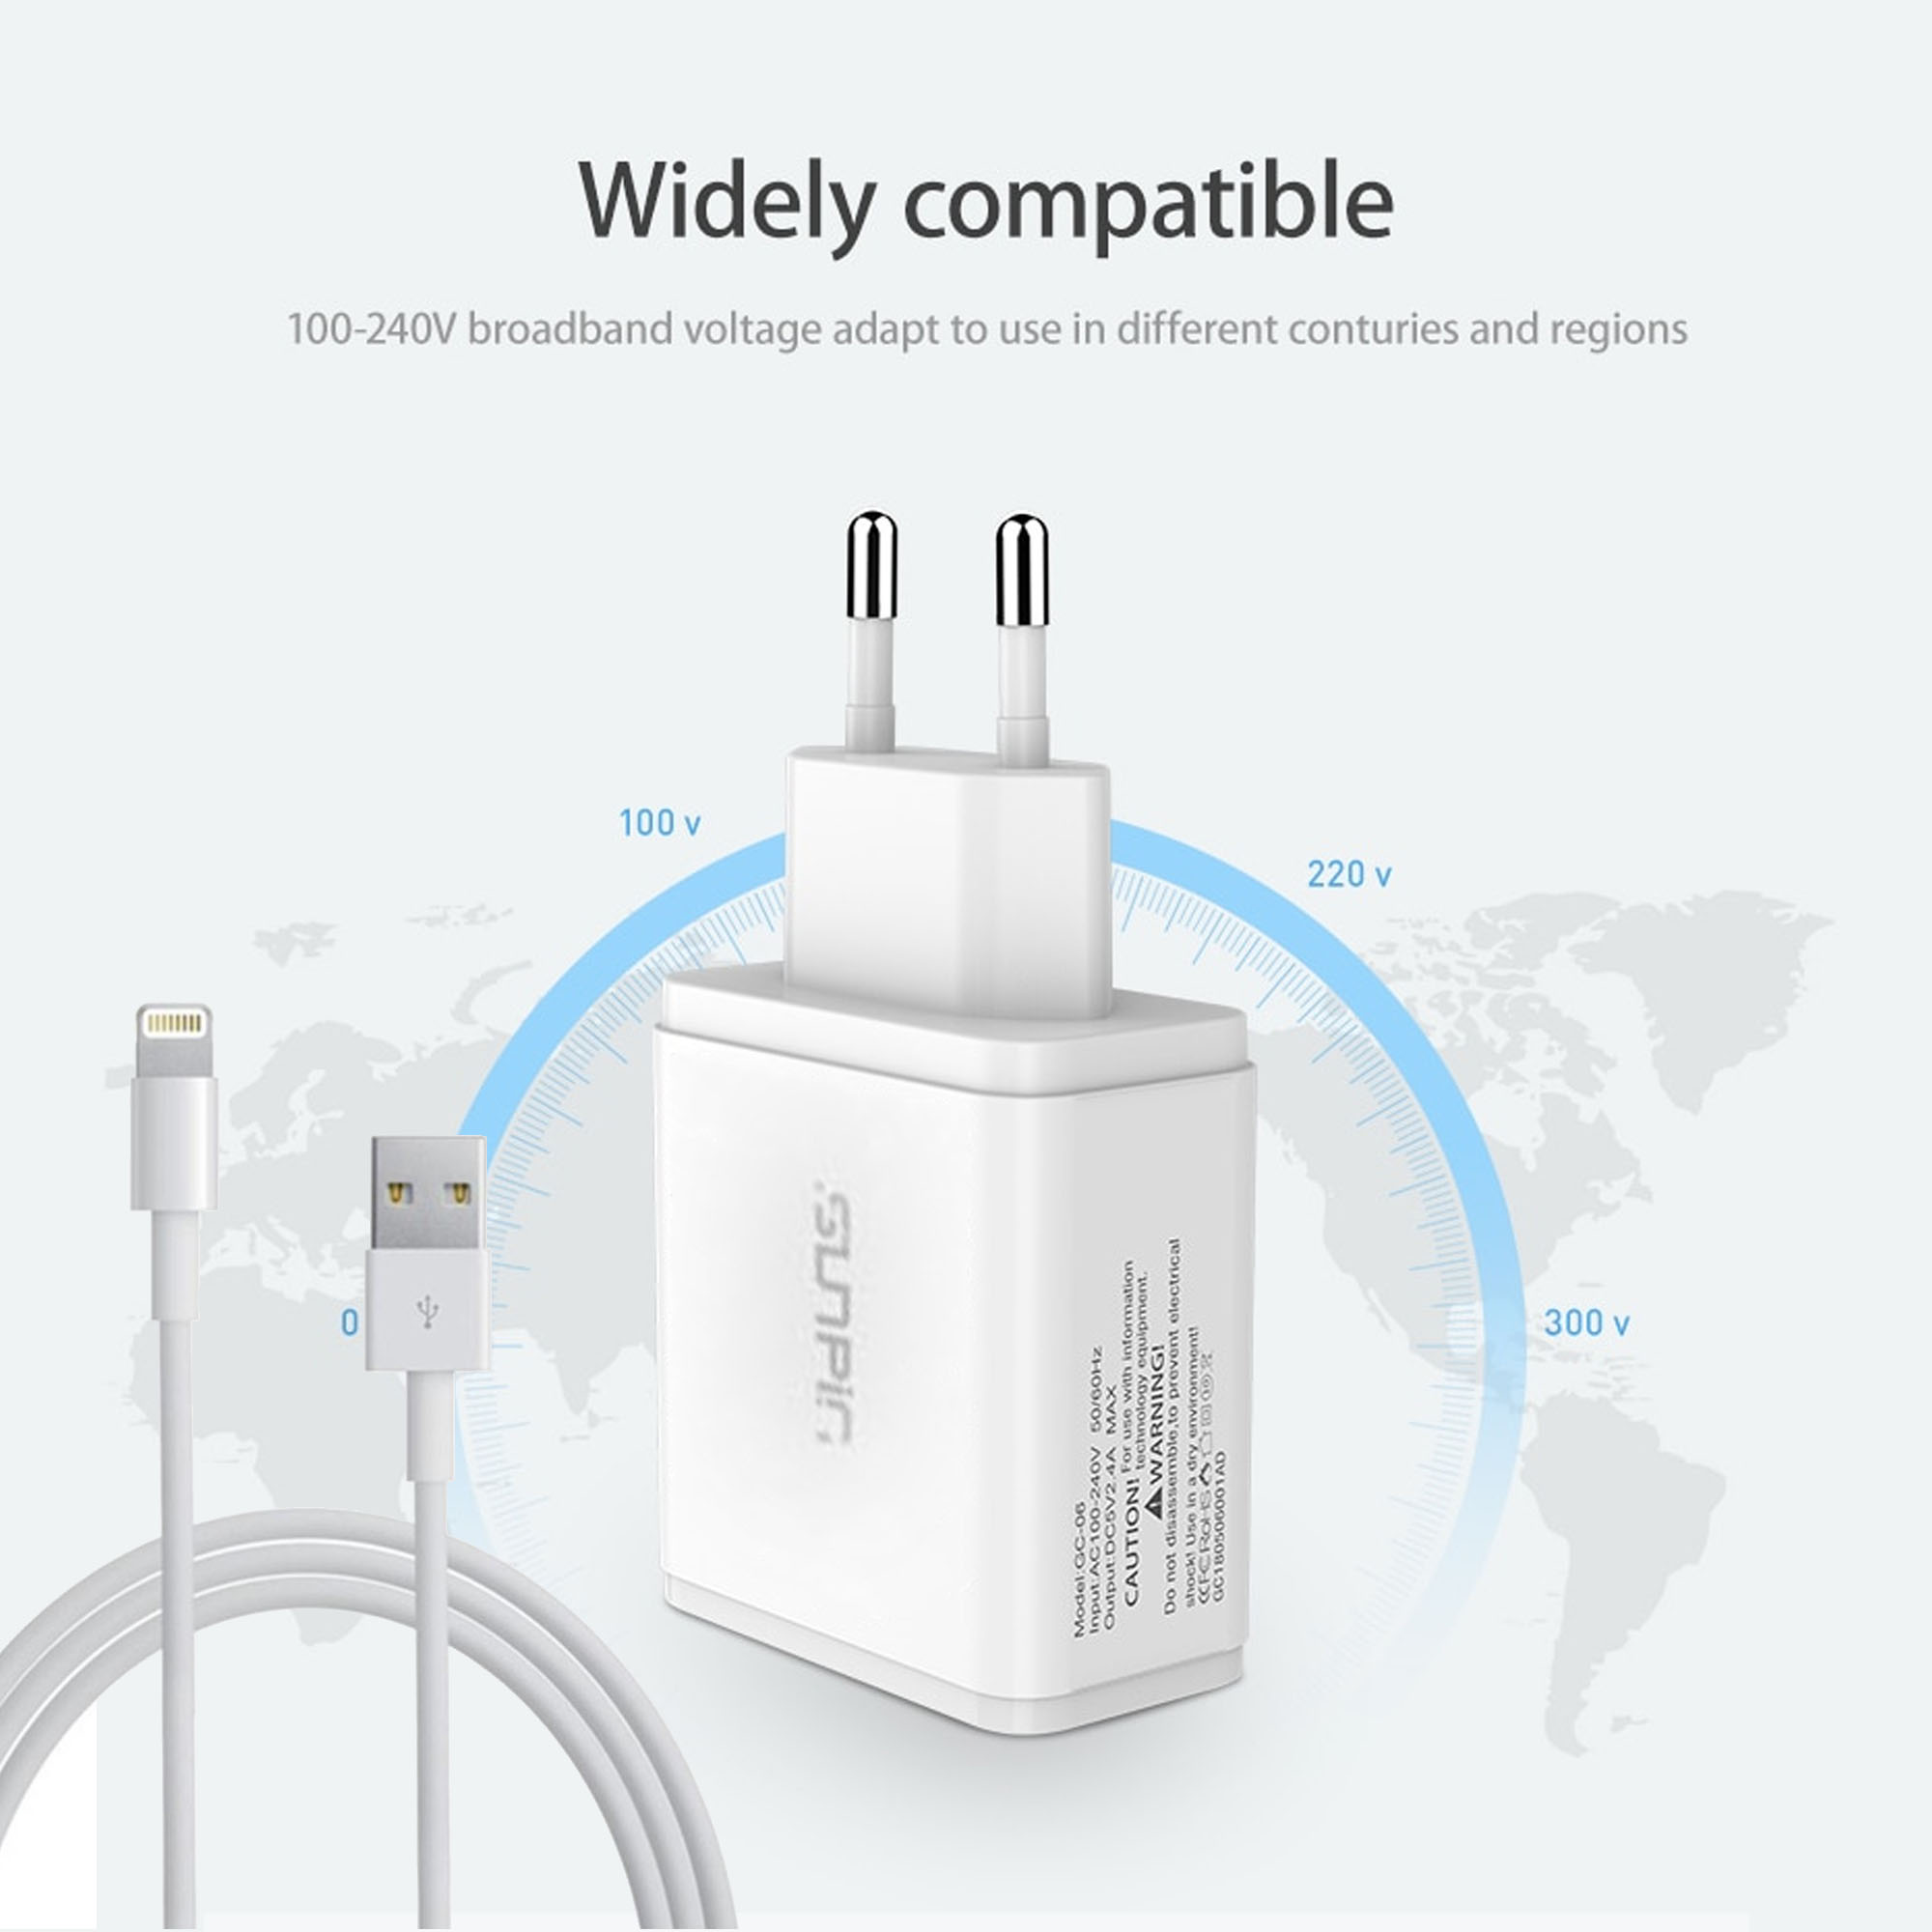 SUNPIN SP21 Iphone usb Fast USB Charger For Phone Dual Ports Phone Charger 5V 2.4A EU Plug Travel Wall Charger For iPhone Samsung Fast